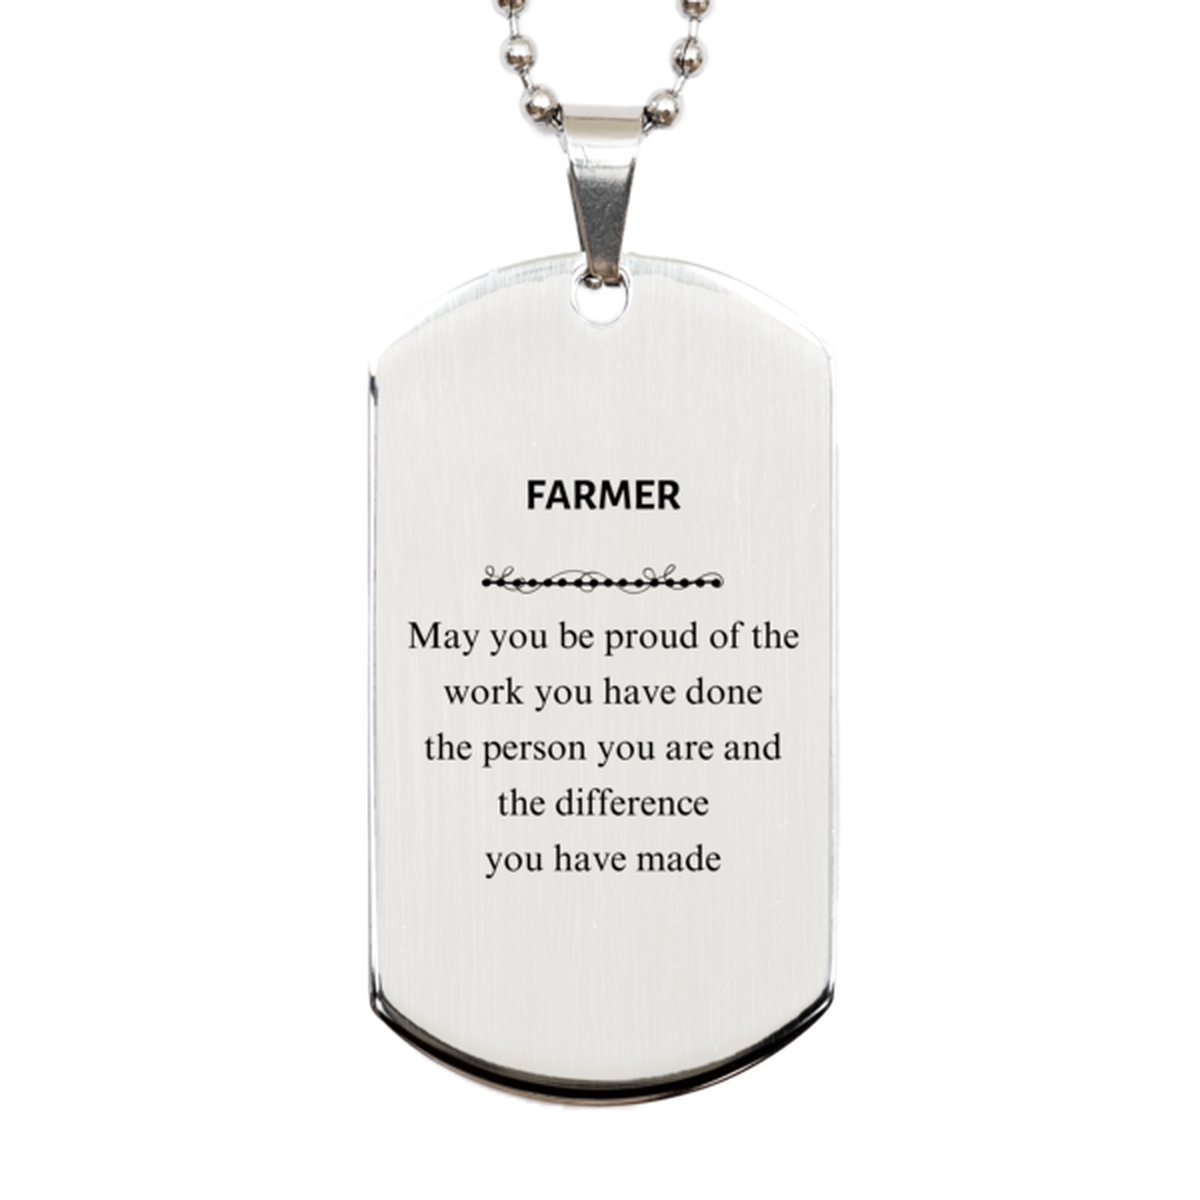 Farmer May you be proud of the work you have done, Retirement Farmer Silver Dog Tag for Colleague Appreciation Gifts Amazing for Farmer